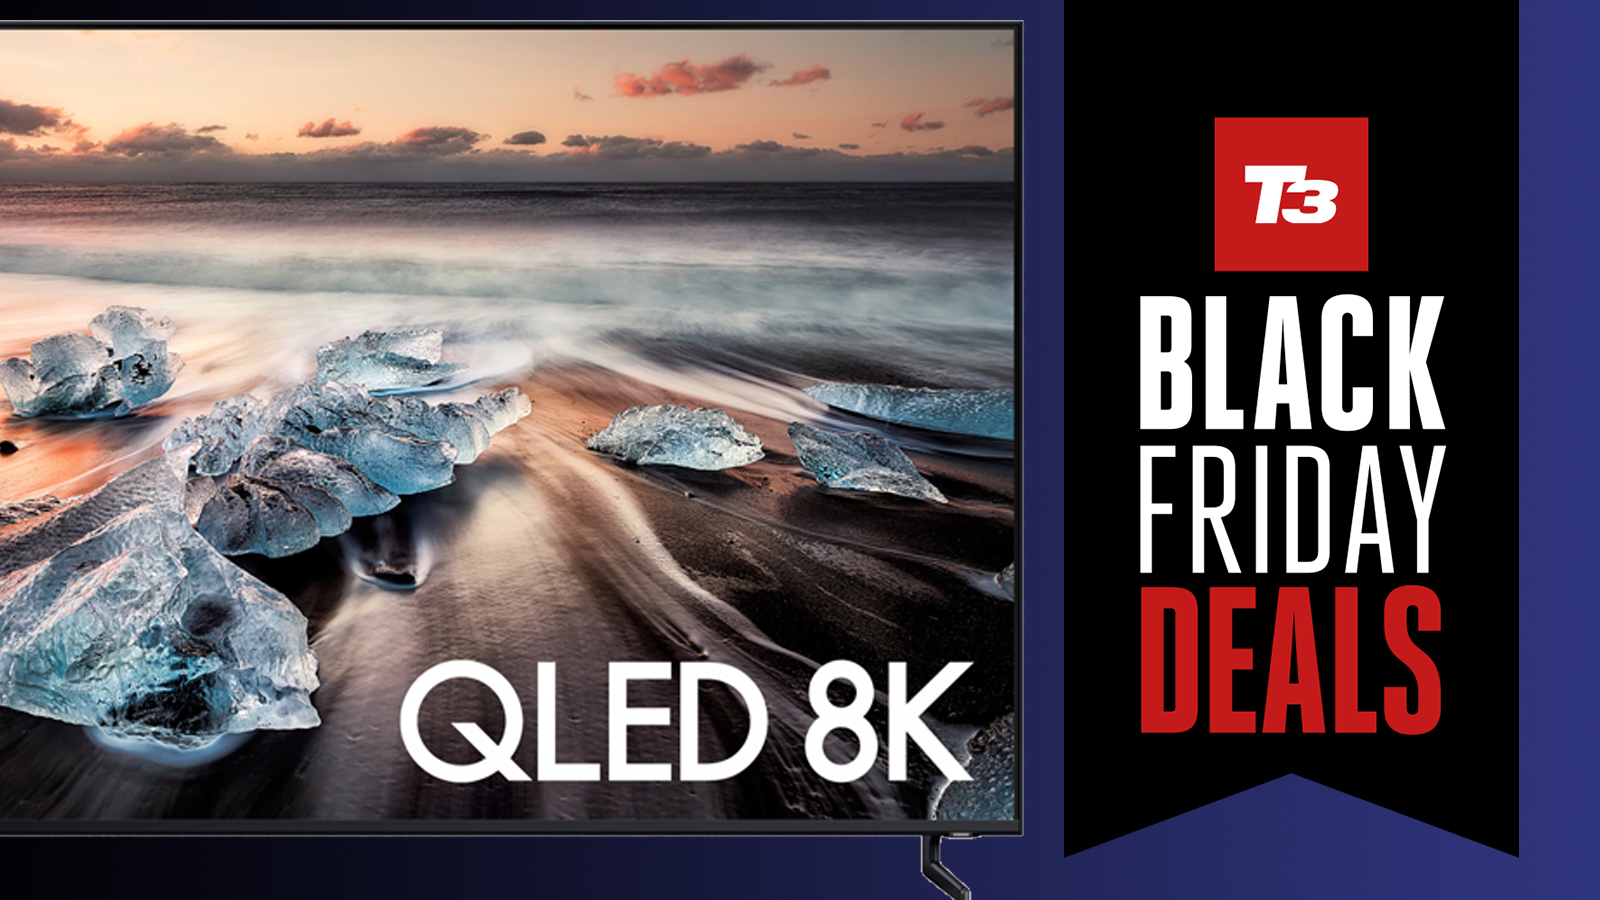 Samsung's Black Friday deals arrive early with huge savings on 4K TVs